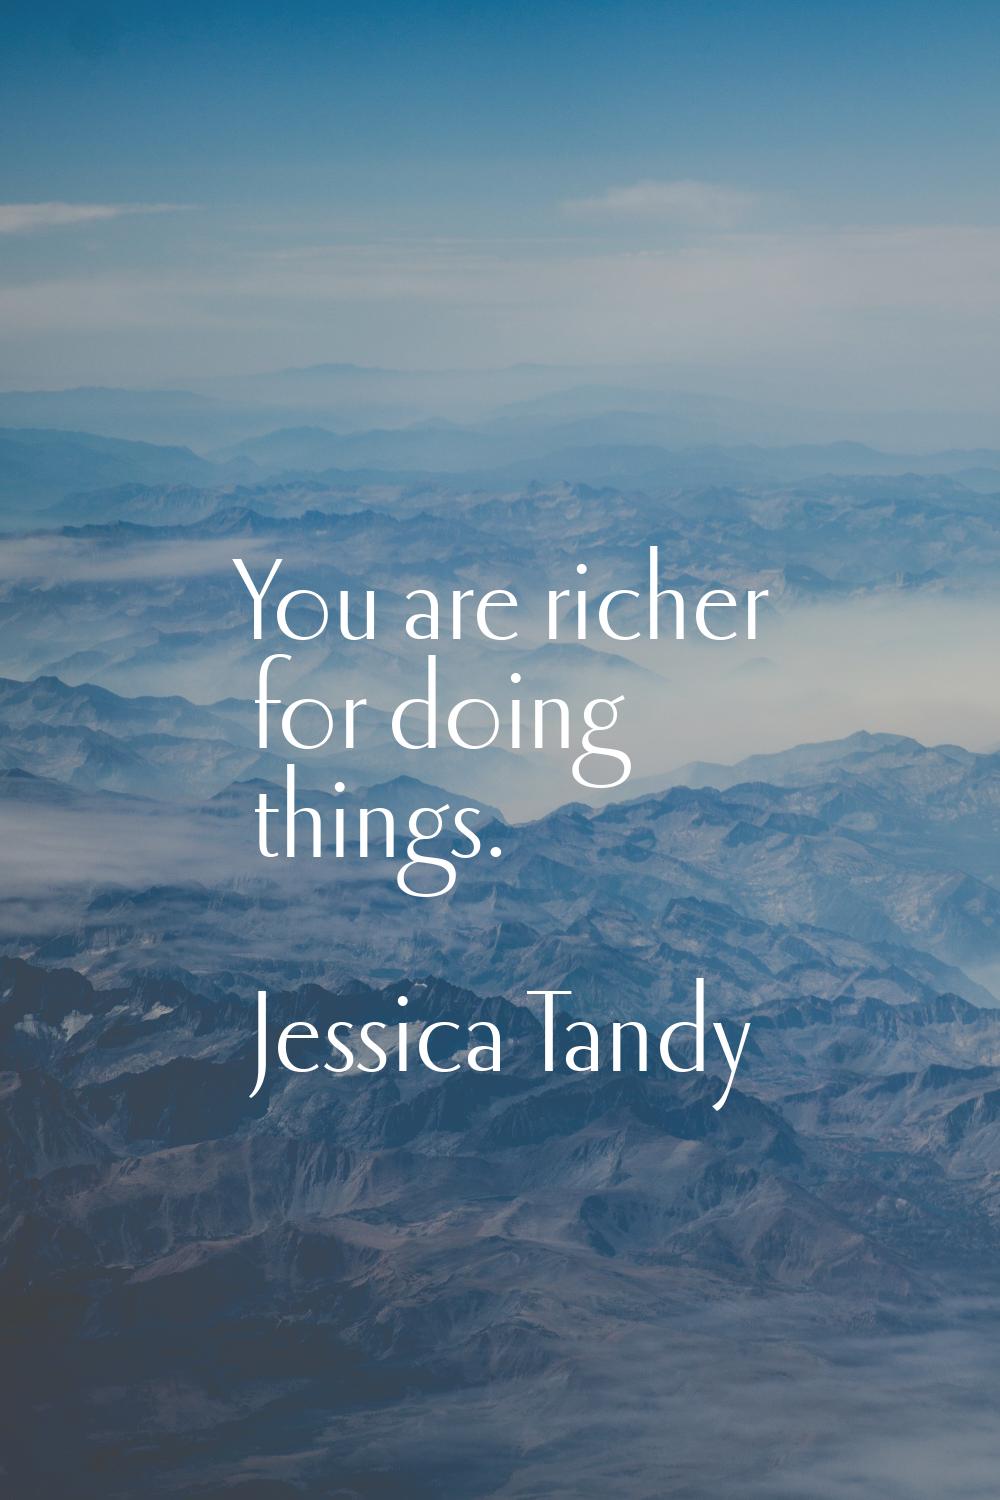 You are richer for doing things.